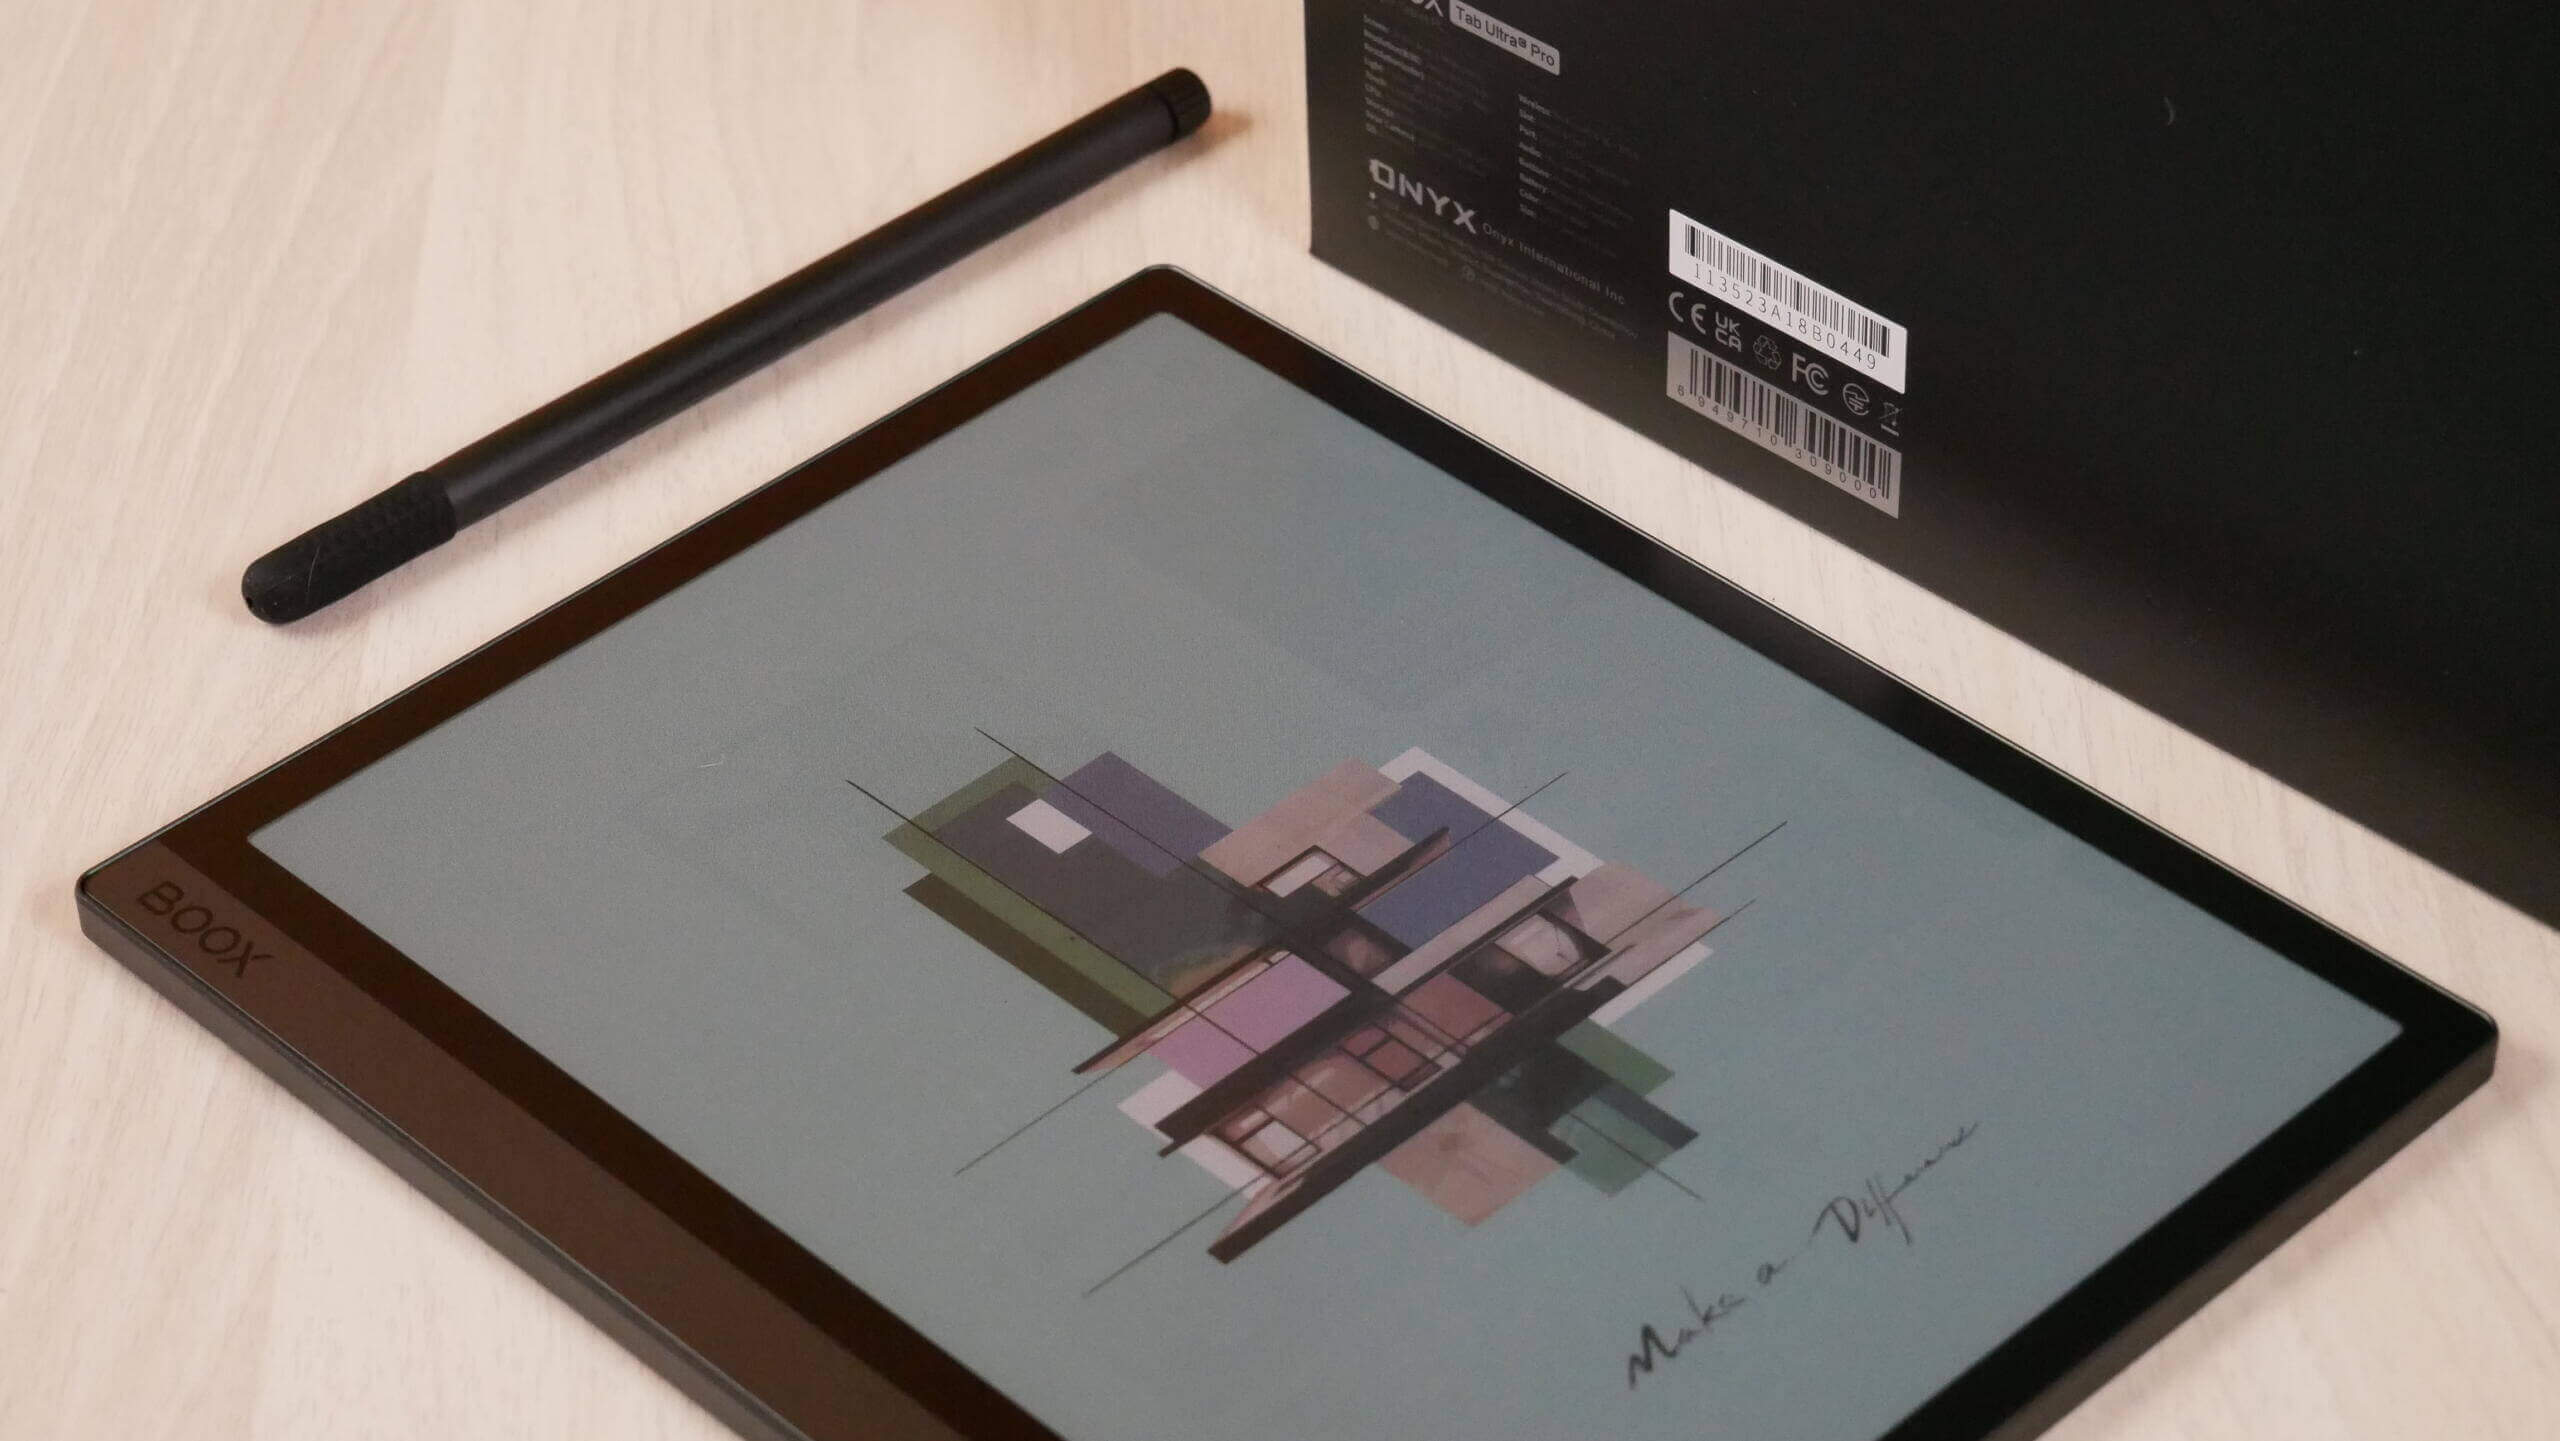 Onyx Boox Tab Ultra C Review: At Last, a Color E Ink Tablet - CNET